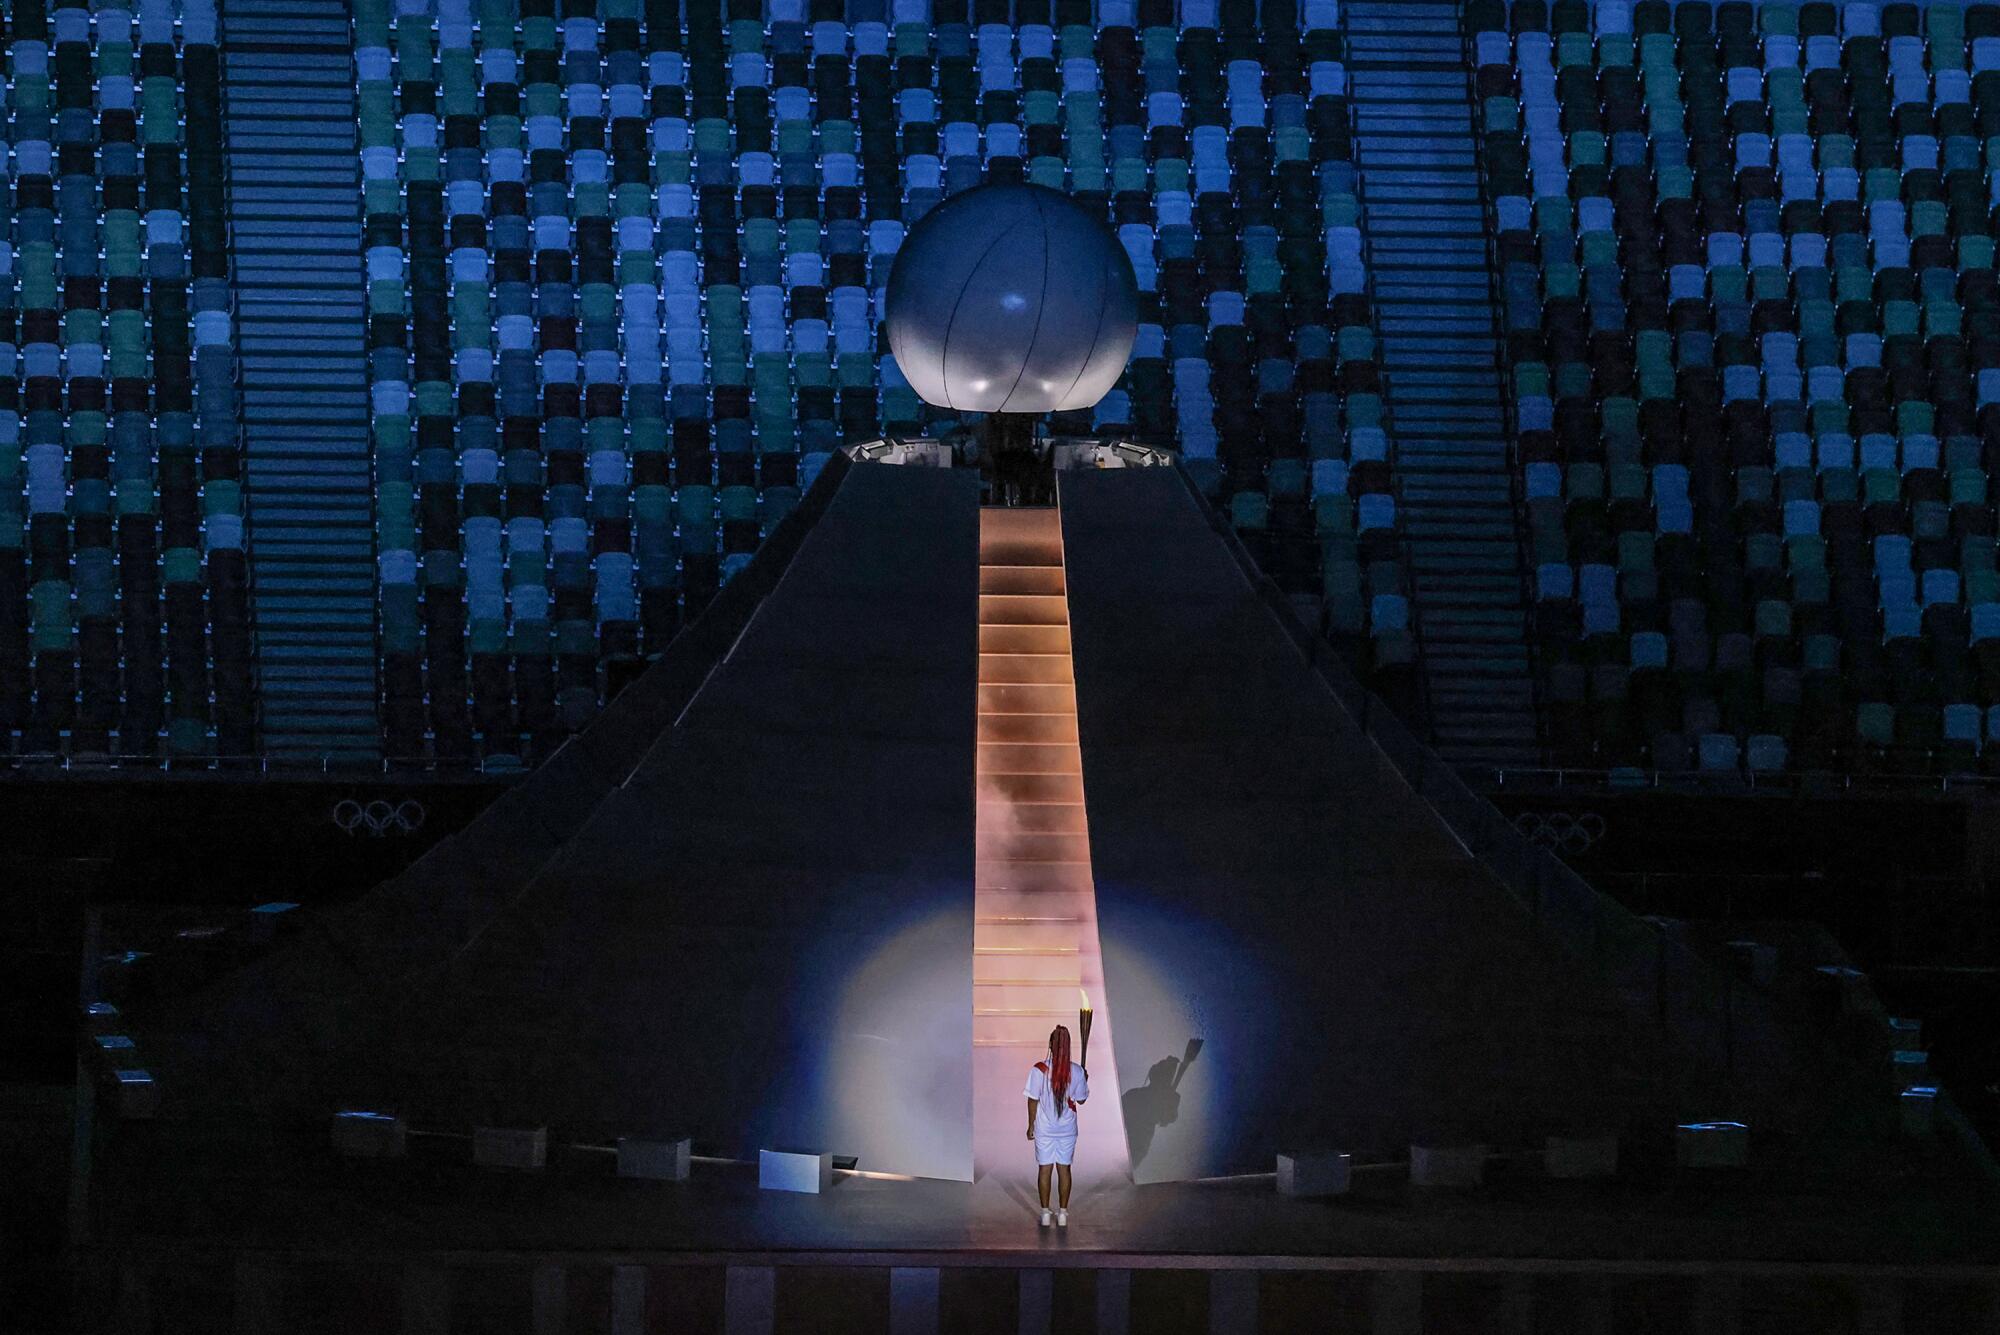 Naomi Osaka prepares to scale stairs to light the Olympic flame at the Tokyo Olympics opening ceremony.